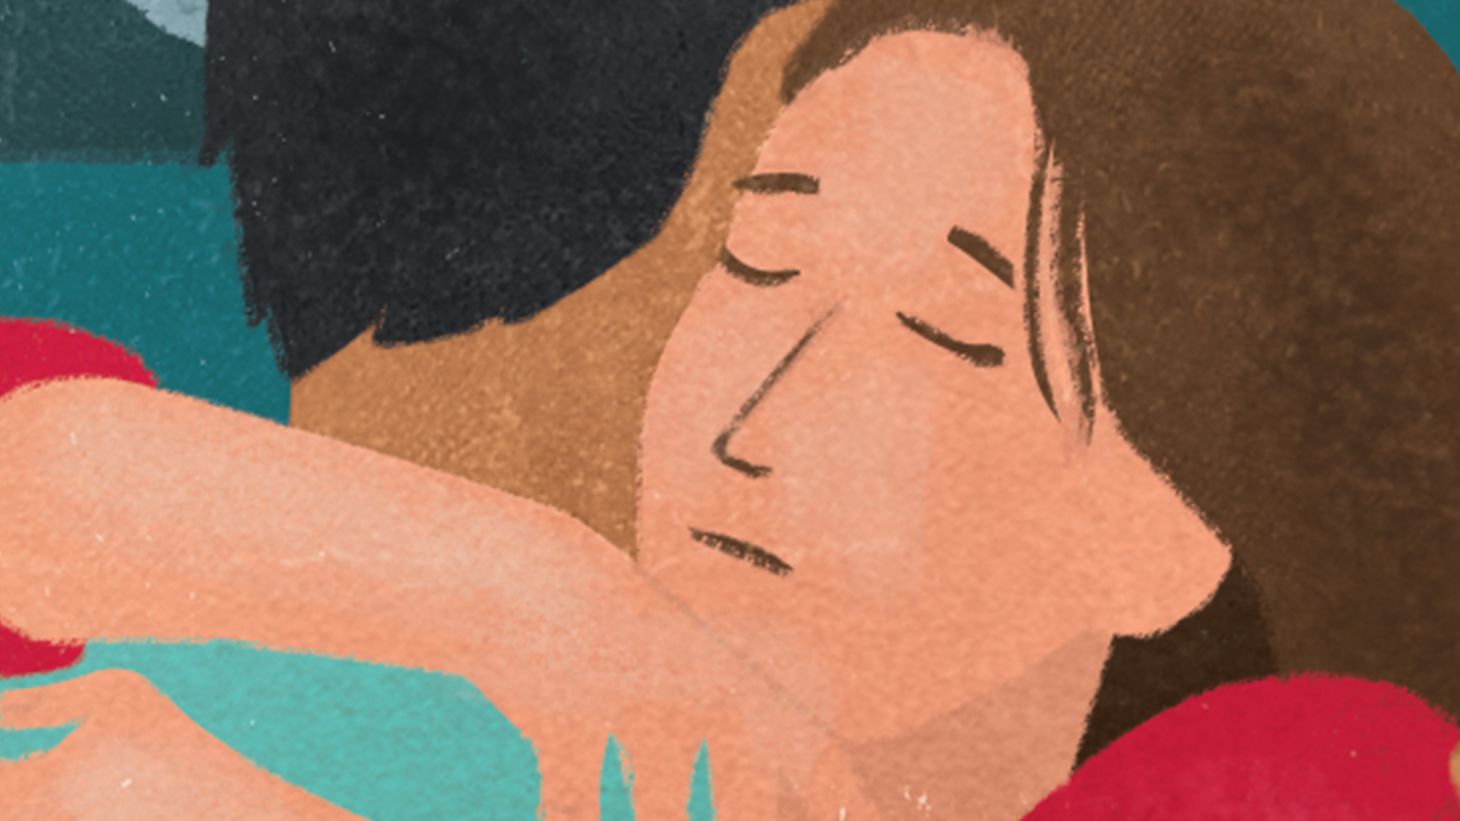 illustration of two people hugging